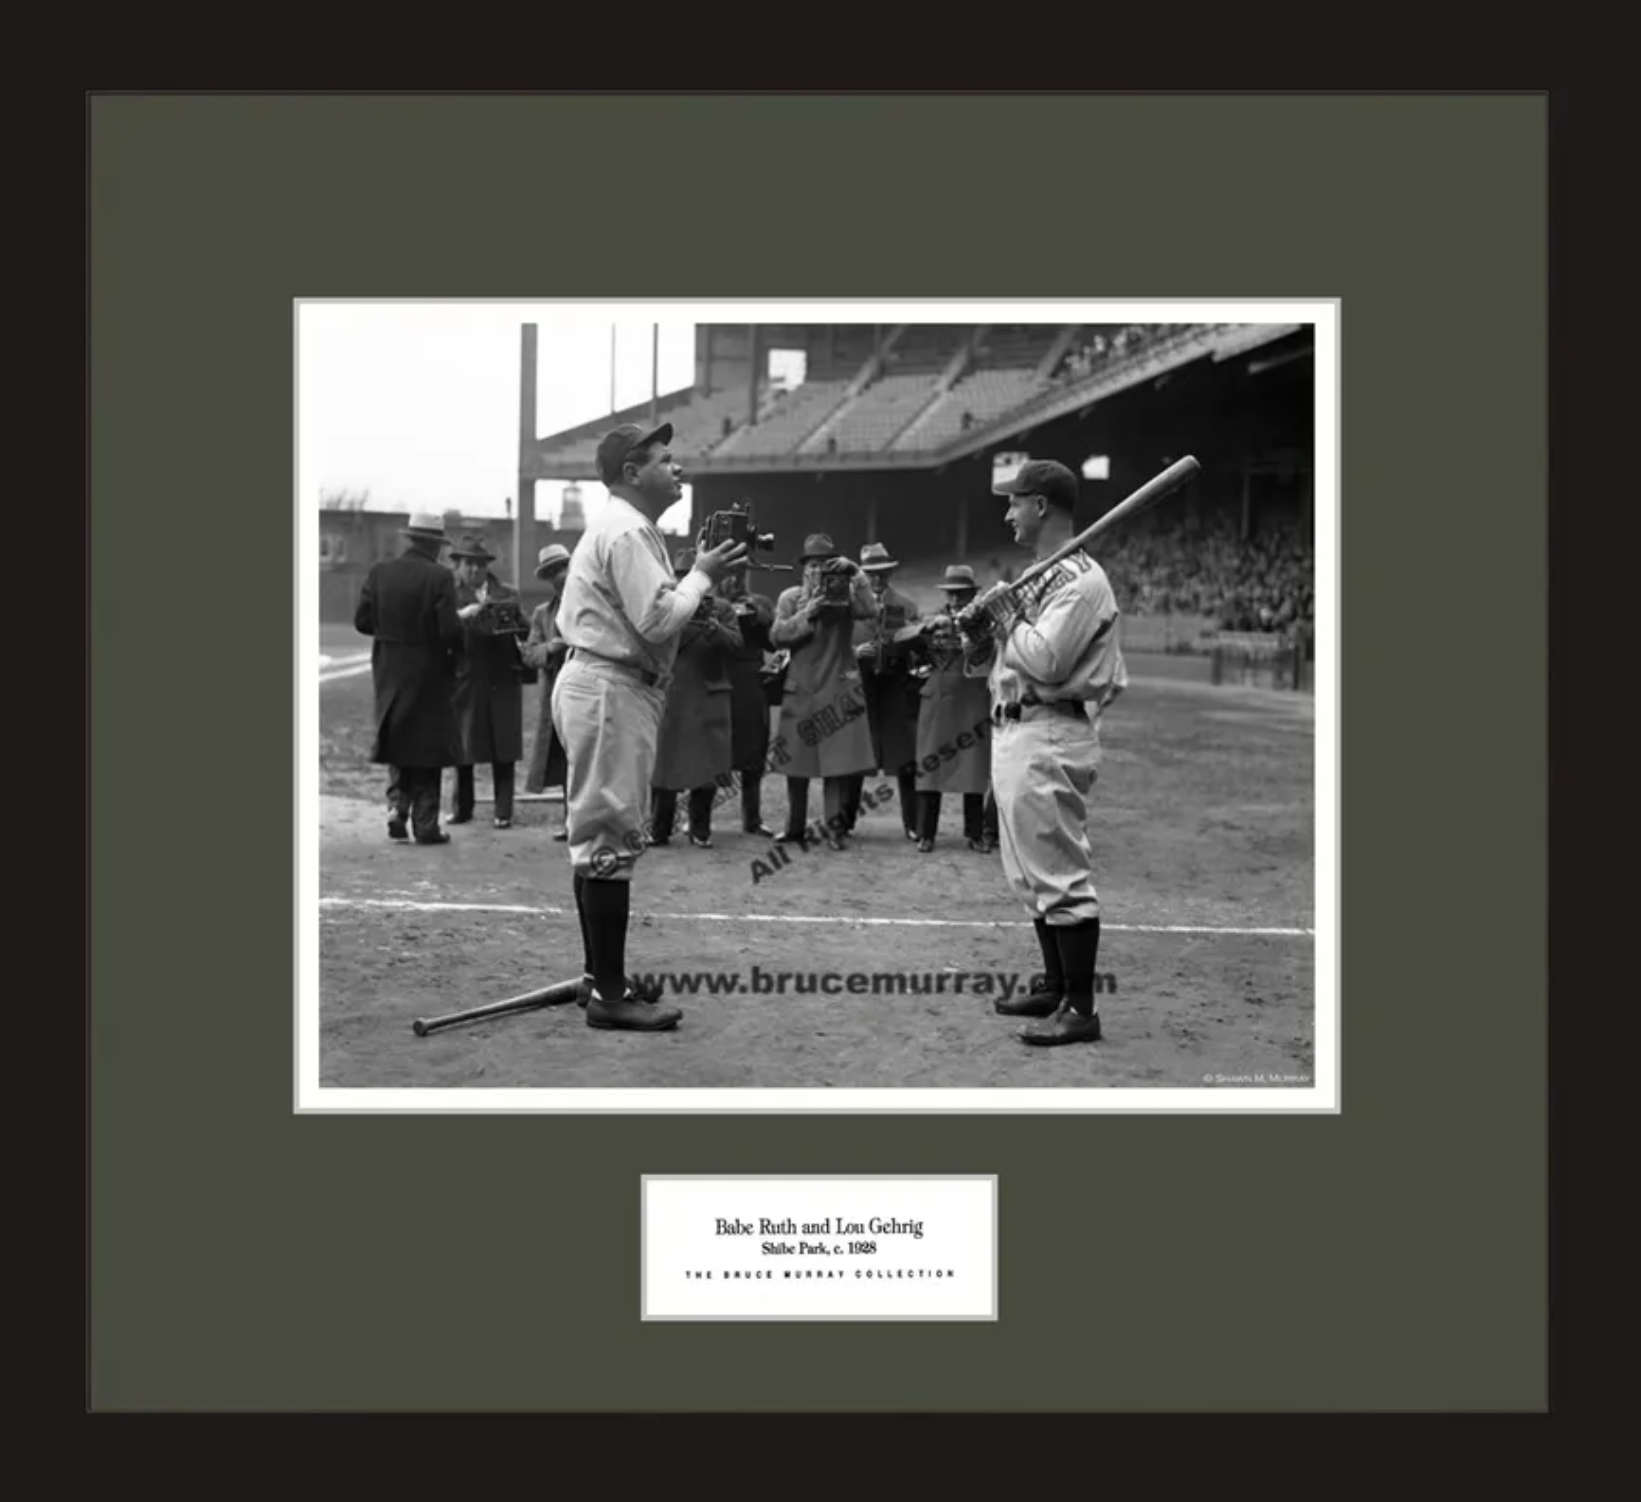 Babe Ruth Braves 11x14 Limited Edition Photo Taken by Bruce Murray